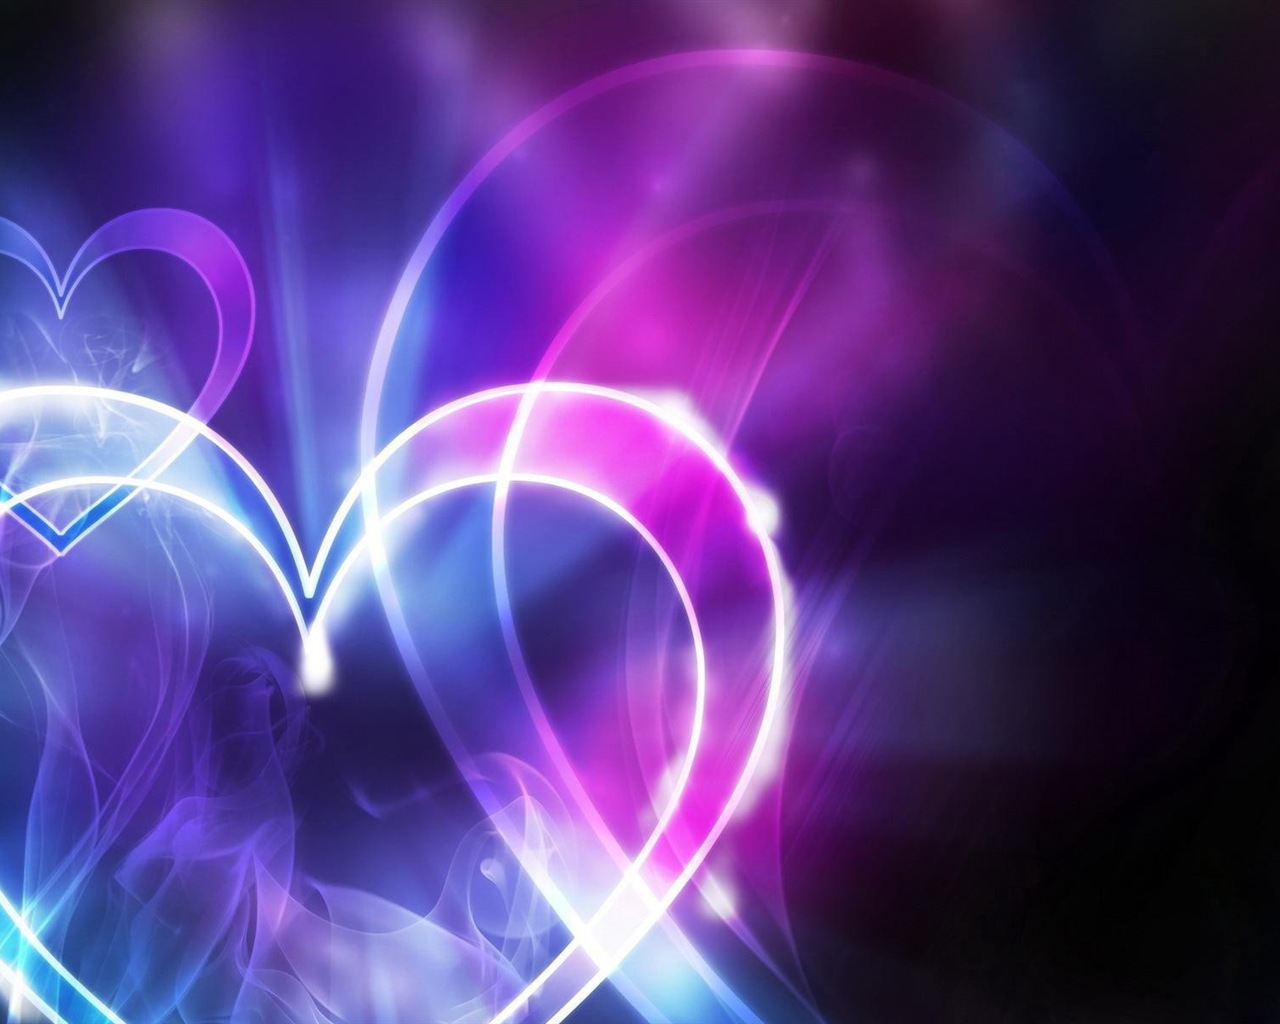 The theme of love, creative heart-shaped HD wallpapers #8 - 1280x1024